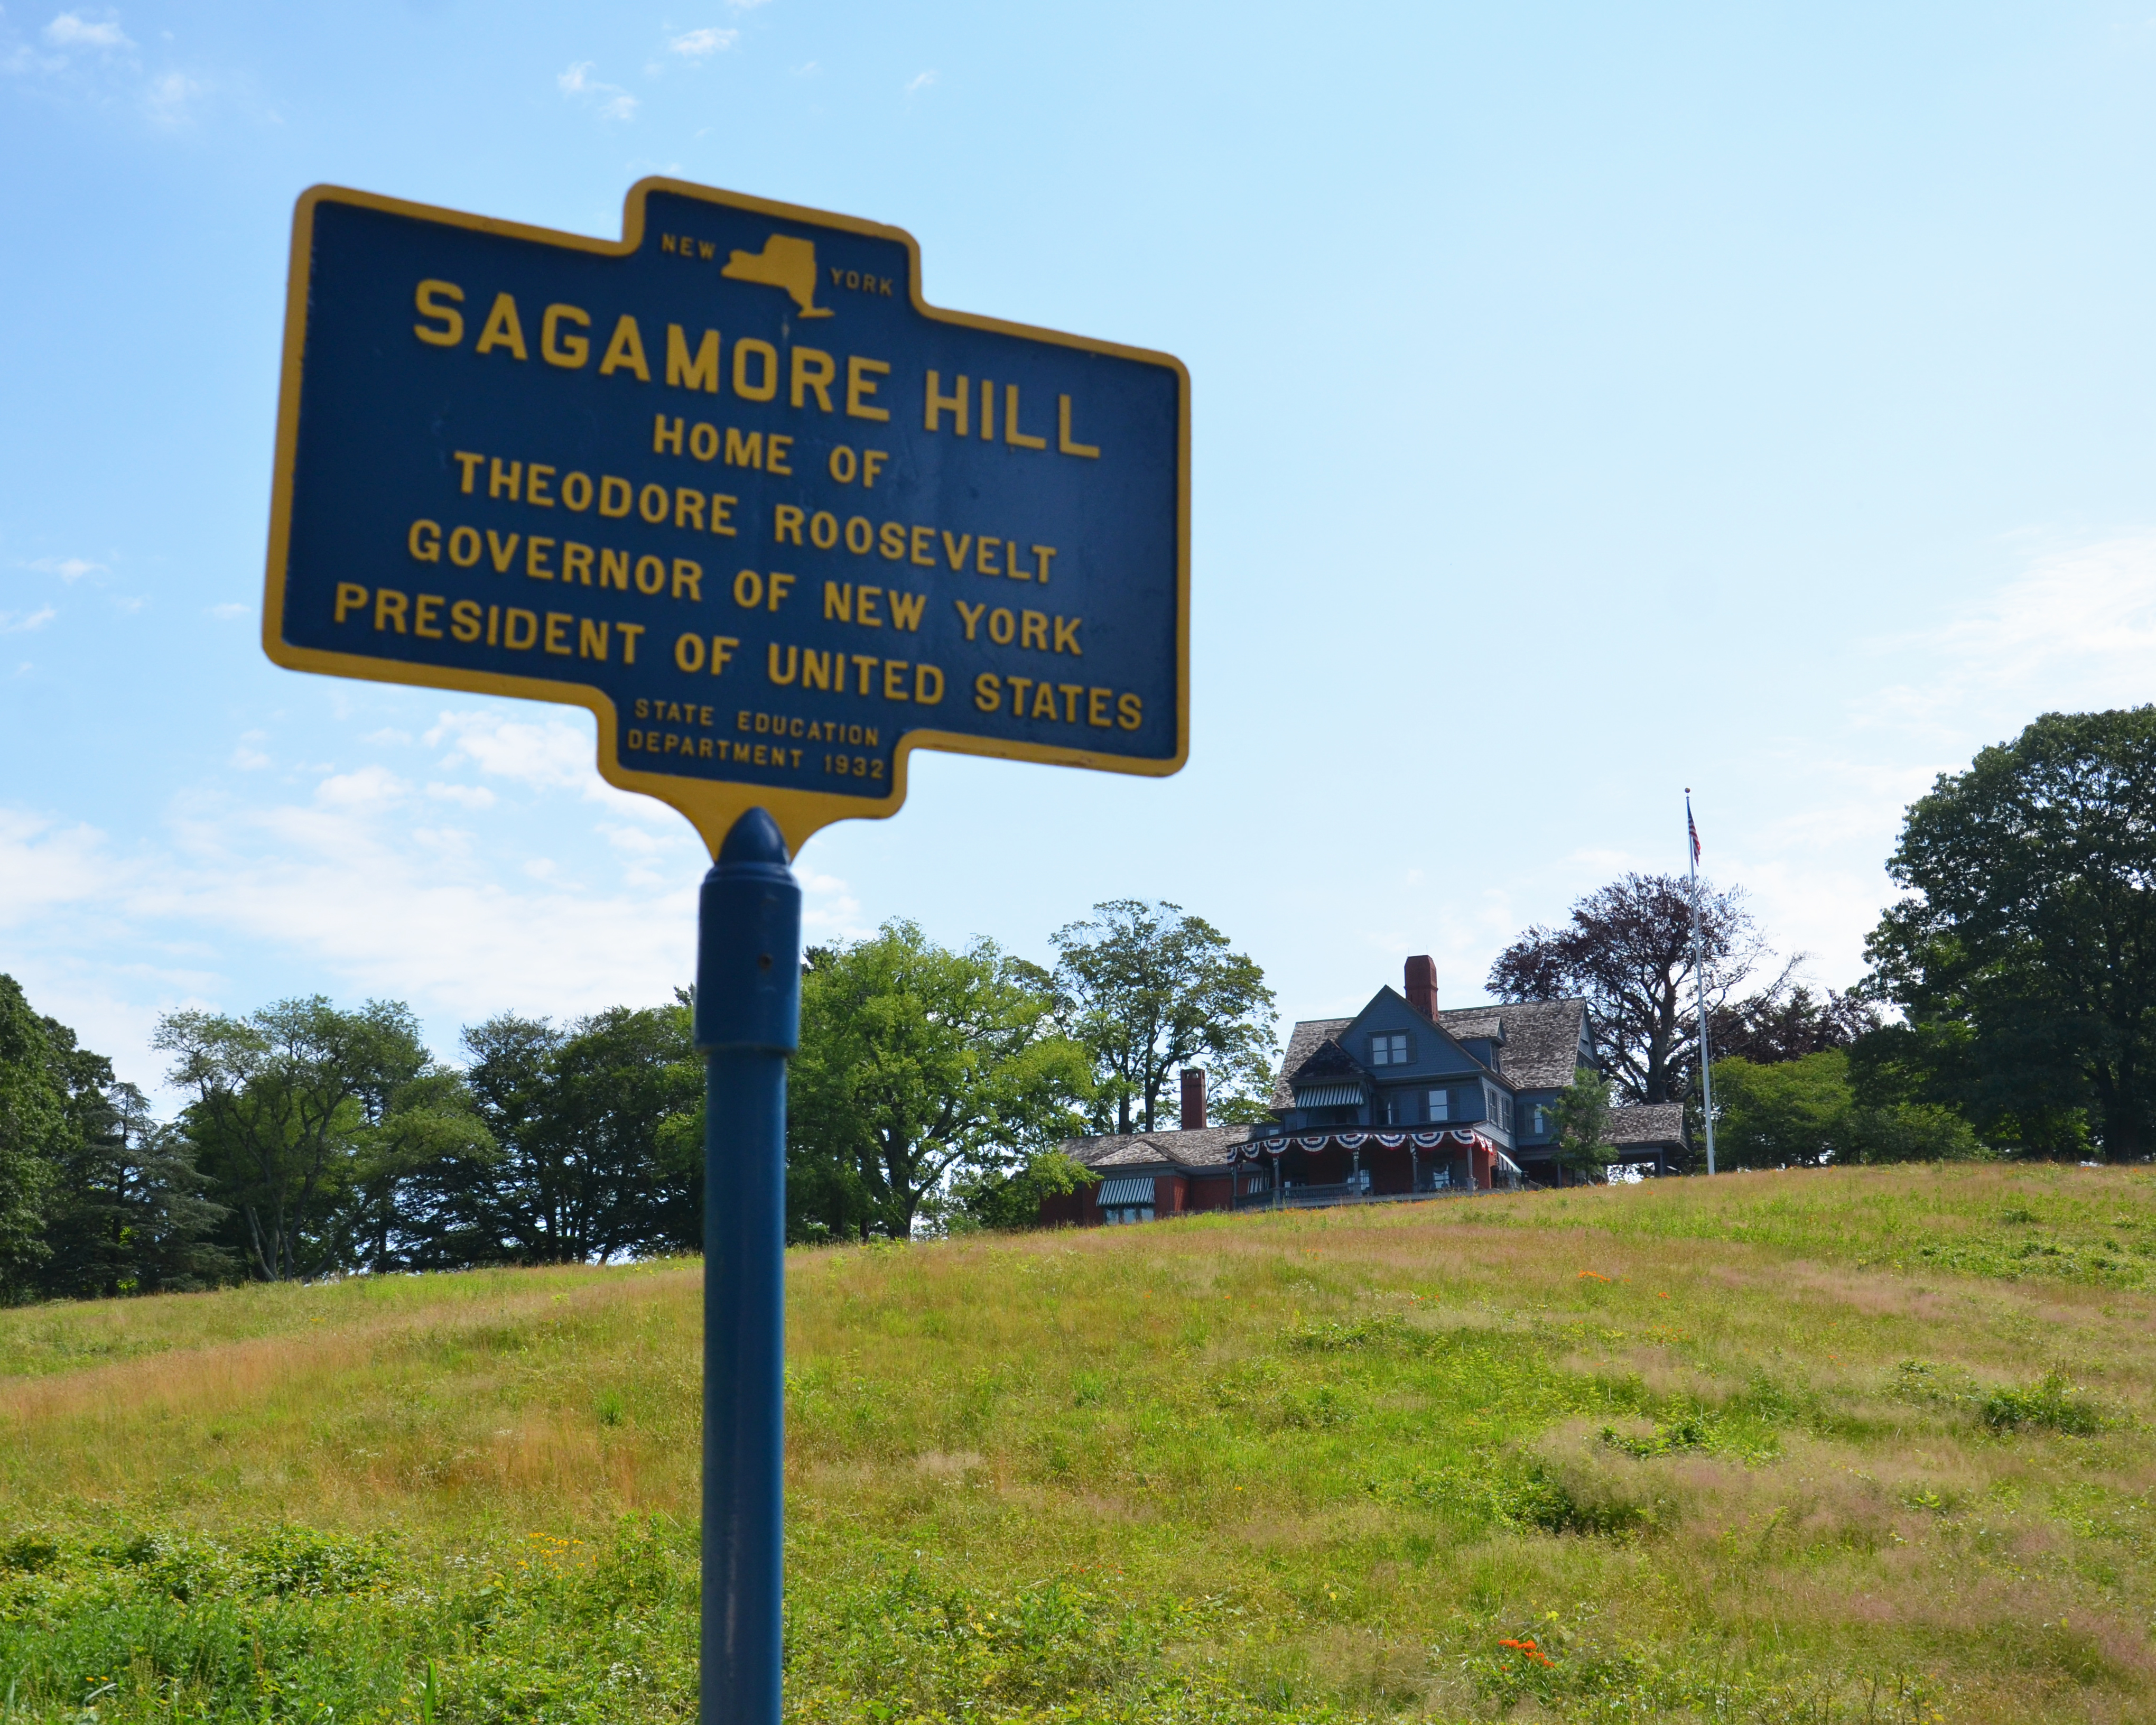 A blue sign reading, "Sagamore Hill, Home of Theodore Roosevelt, Governor of New York, President of United States" with the historic home atop a hill in the background.